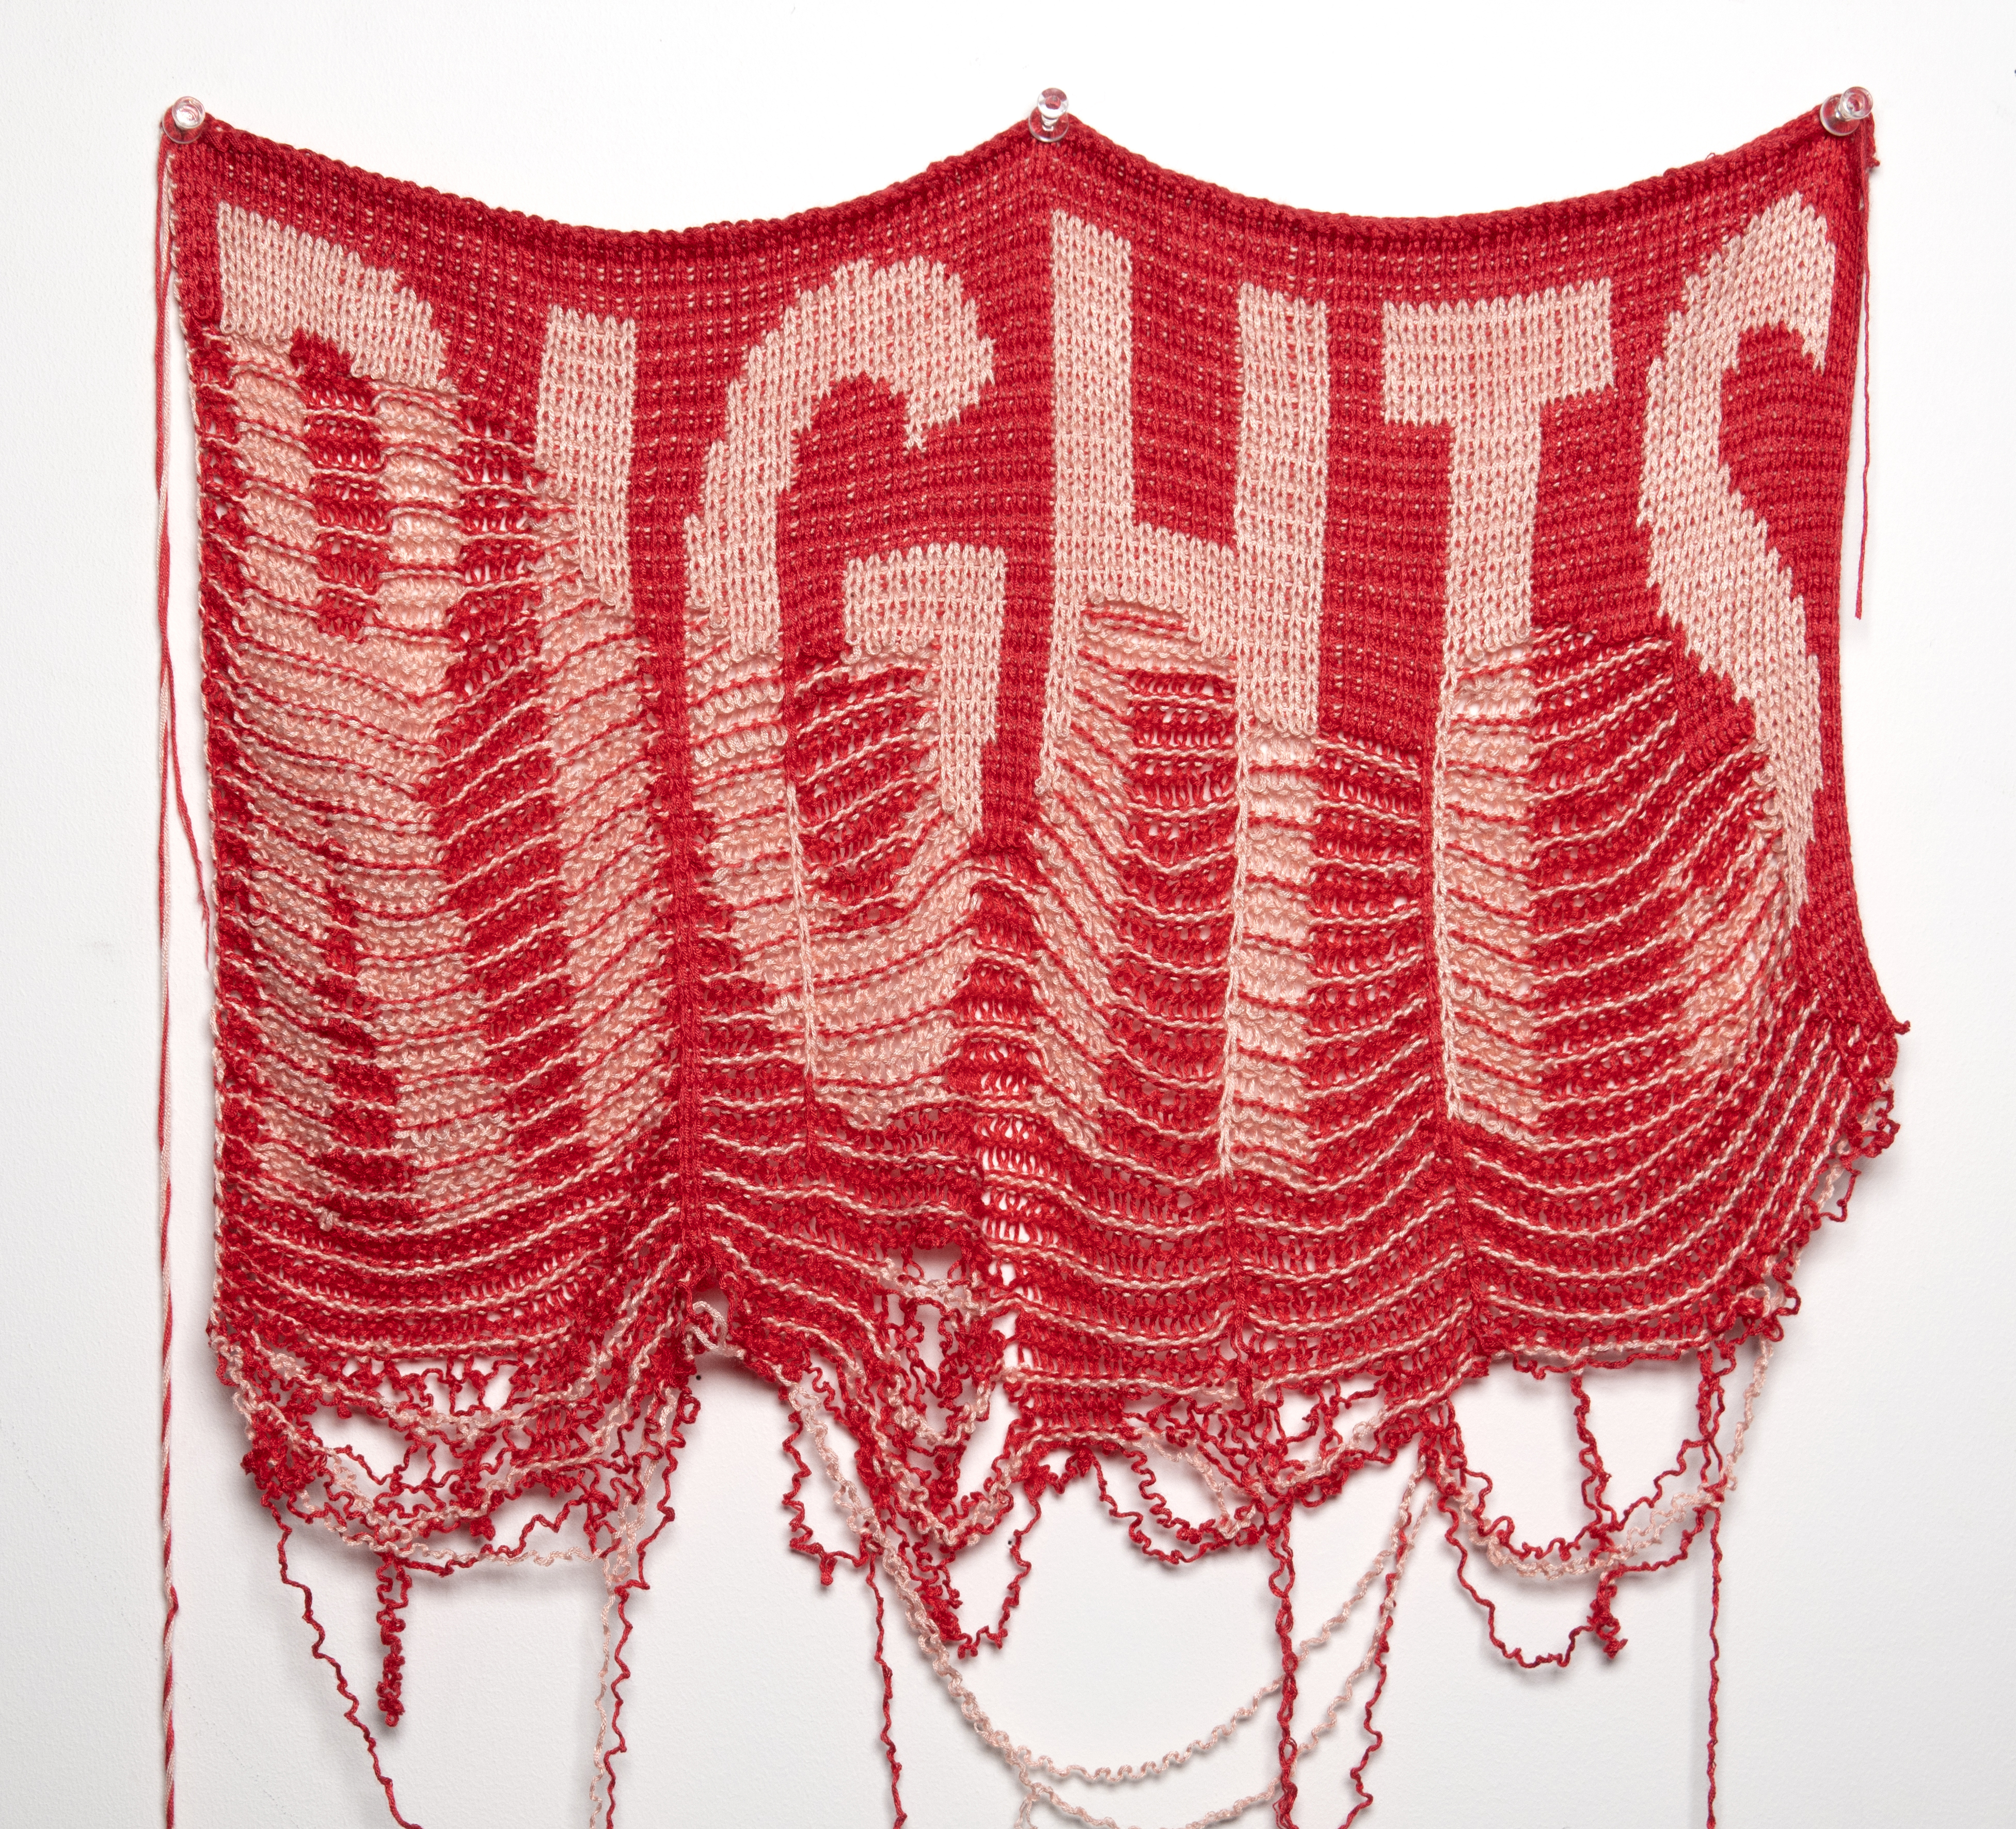 A video still of a red textile work, which reads RIGHTS, and appears to be unraveling.